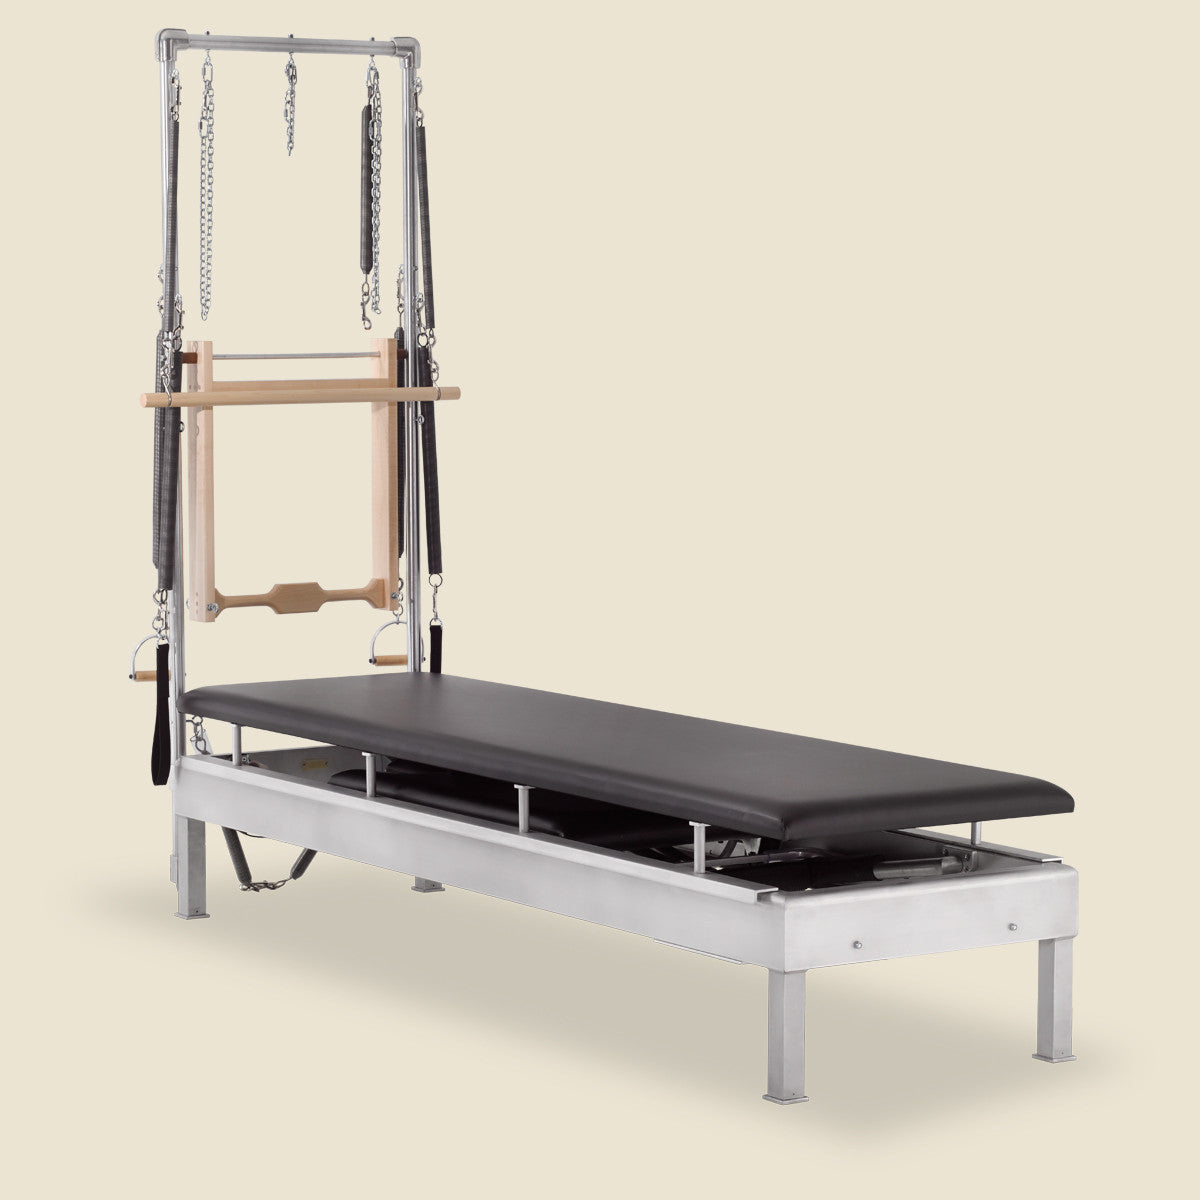 NJ1002 Reformer With Half Trapeze, for Pilates Exercise Machine at